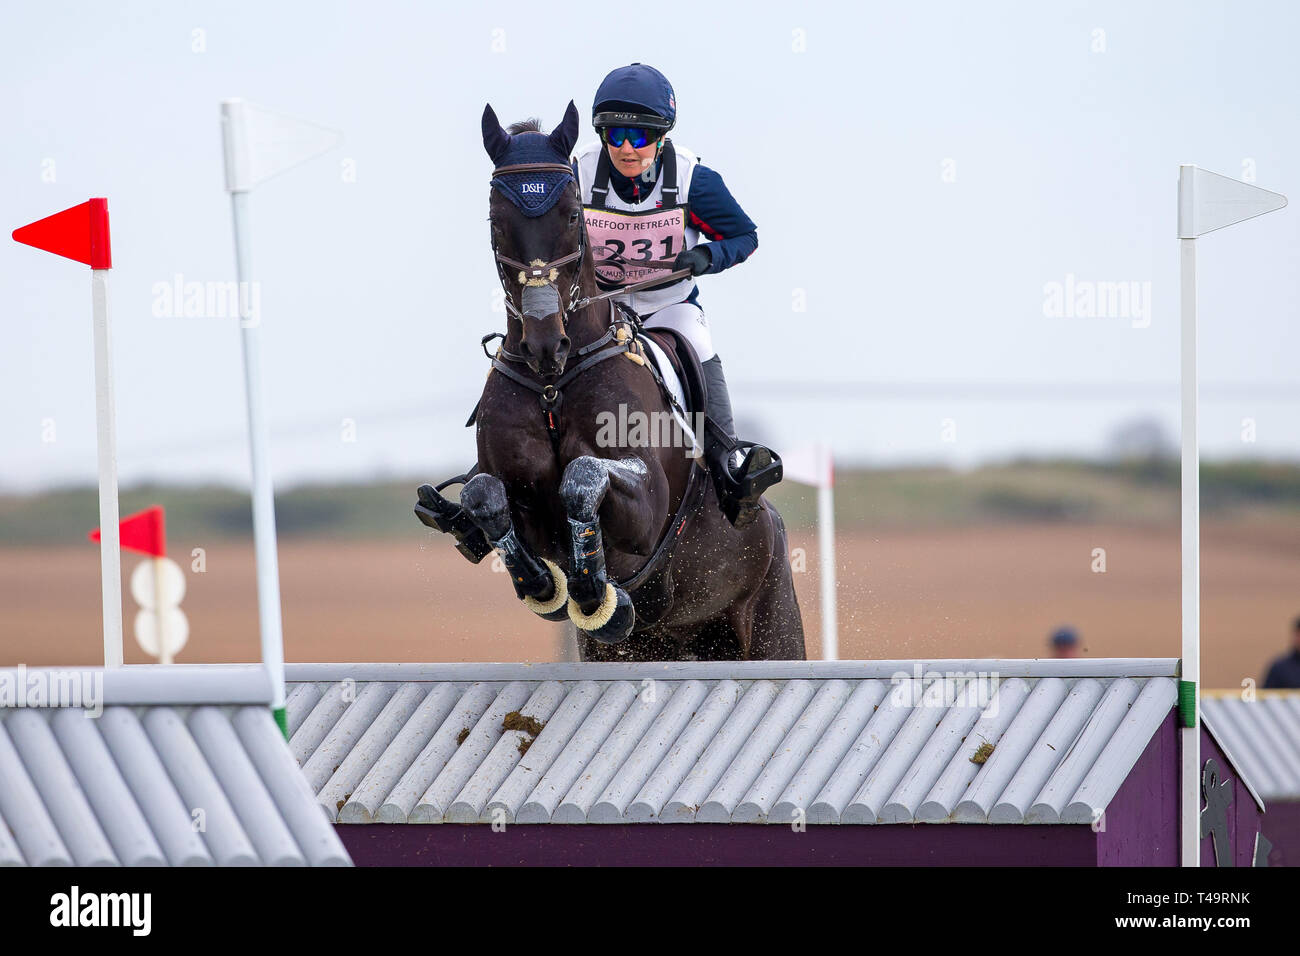 Norfolk, UK. 14th Apr, 2019. 9th place. Laura Collett riding Dacapo. GBR. CCI4*. Section B. Barefoot Retreats Burnham Market International Horse Trials. Eventing. Burnham Market. Norfolk. United Kingdom. GBR. {14}/{04}/{2019}. Credit: Sport In Pictures/Alamy Live News Stock Photo